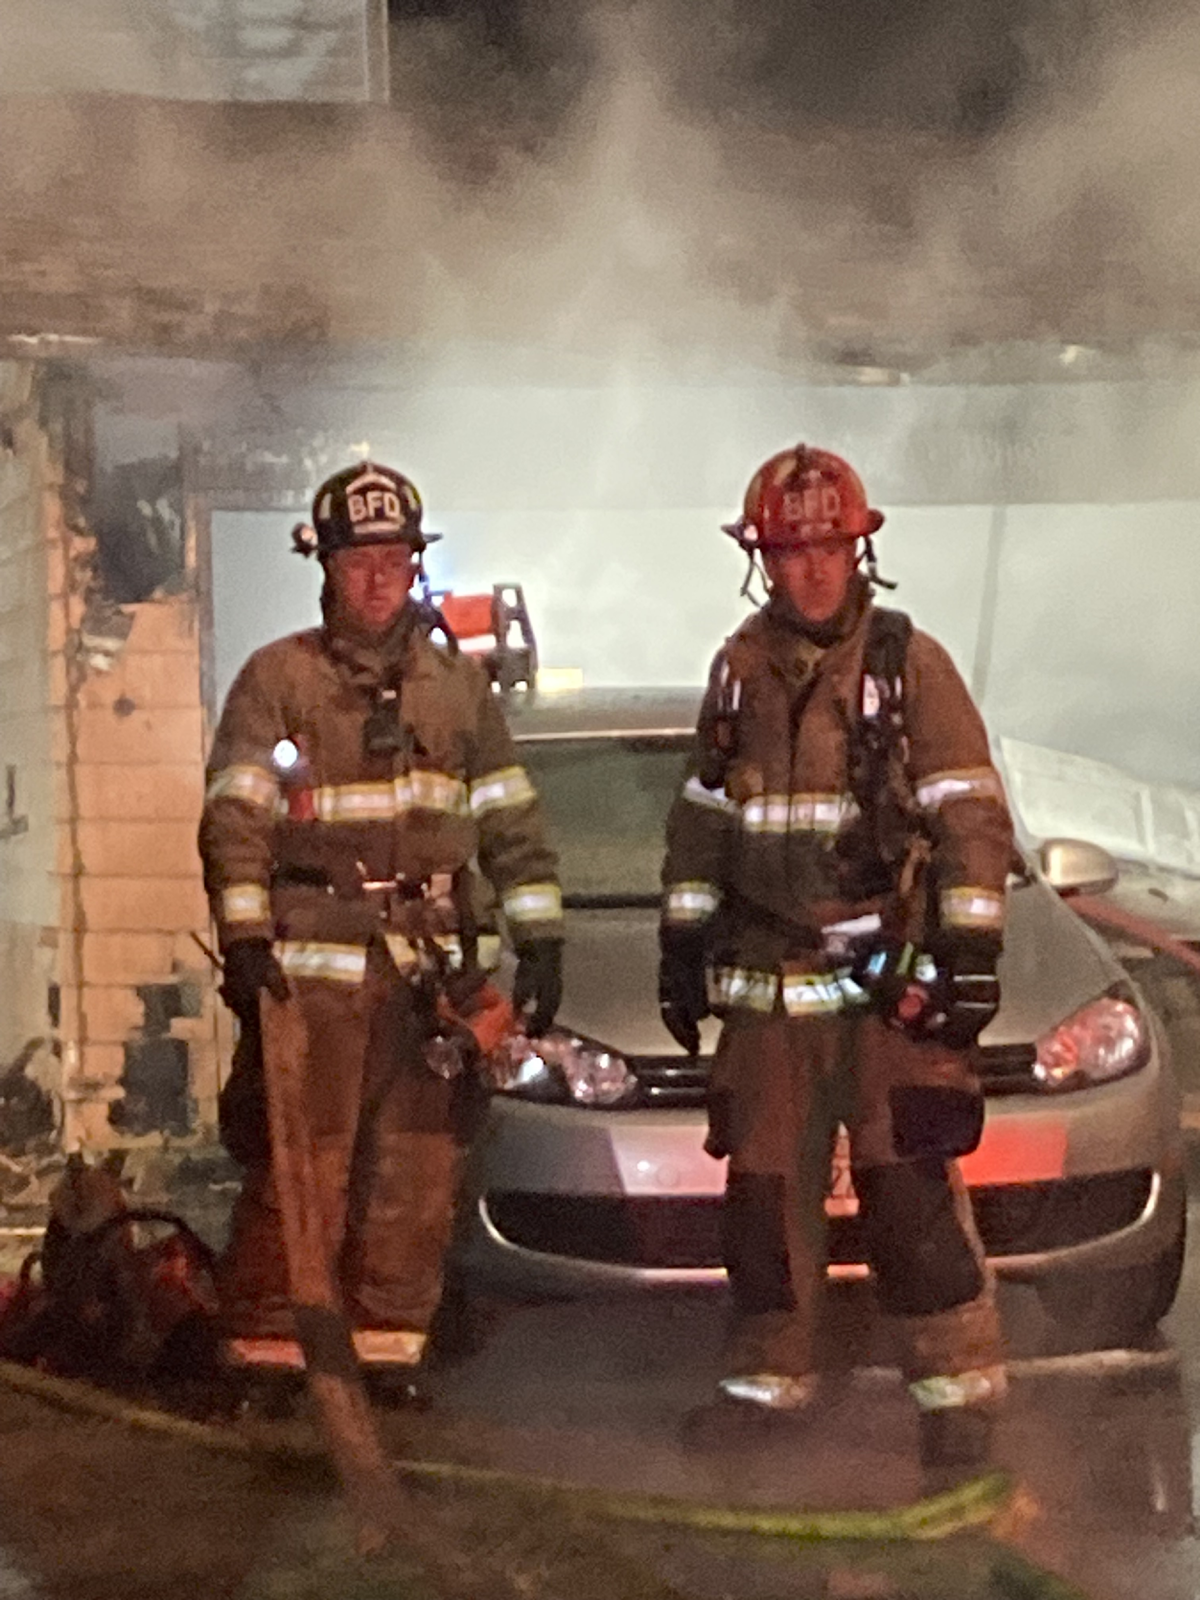 Garage on fire at at 507 E Walnut St. in Bloomington, IL (Photo courtesy of Bloomington Fire Department)